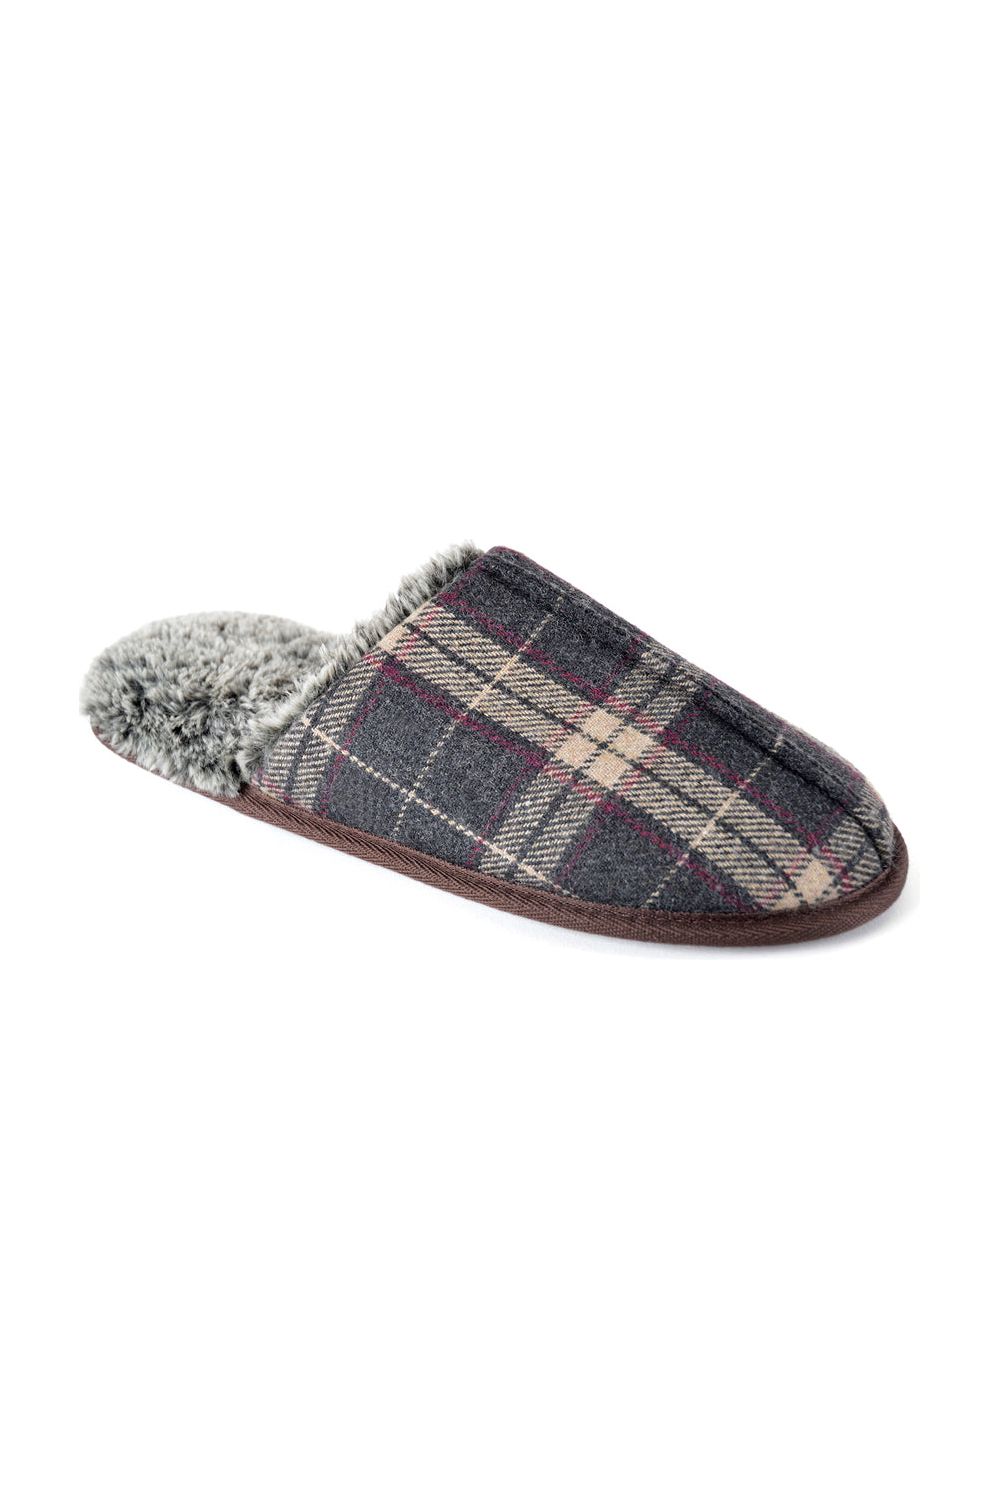 Mens Slip On Dark Grey And Red Check Slippers